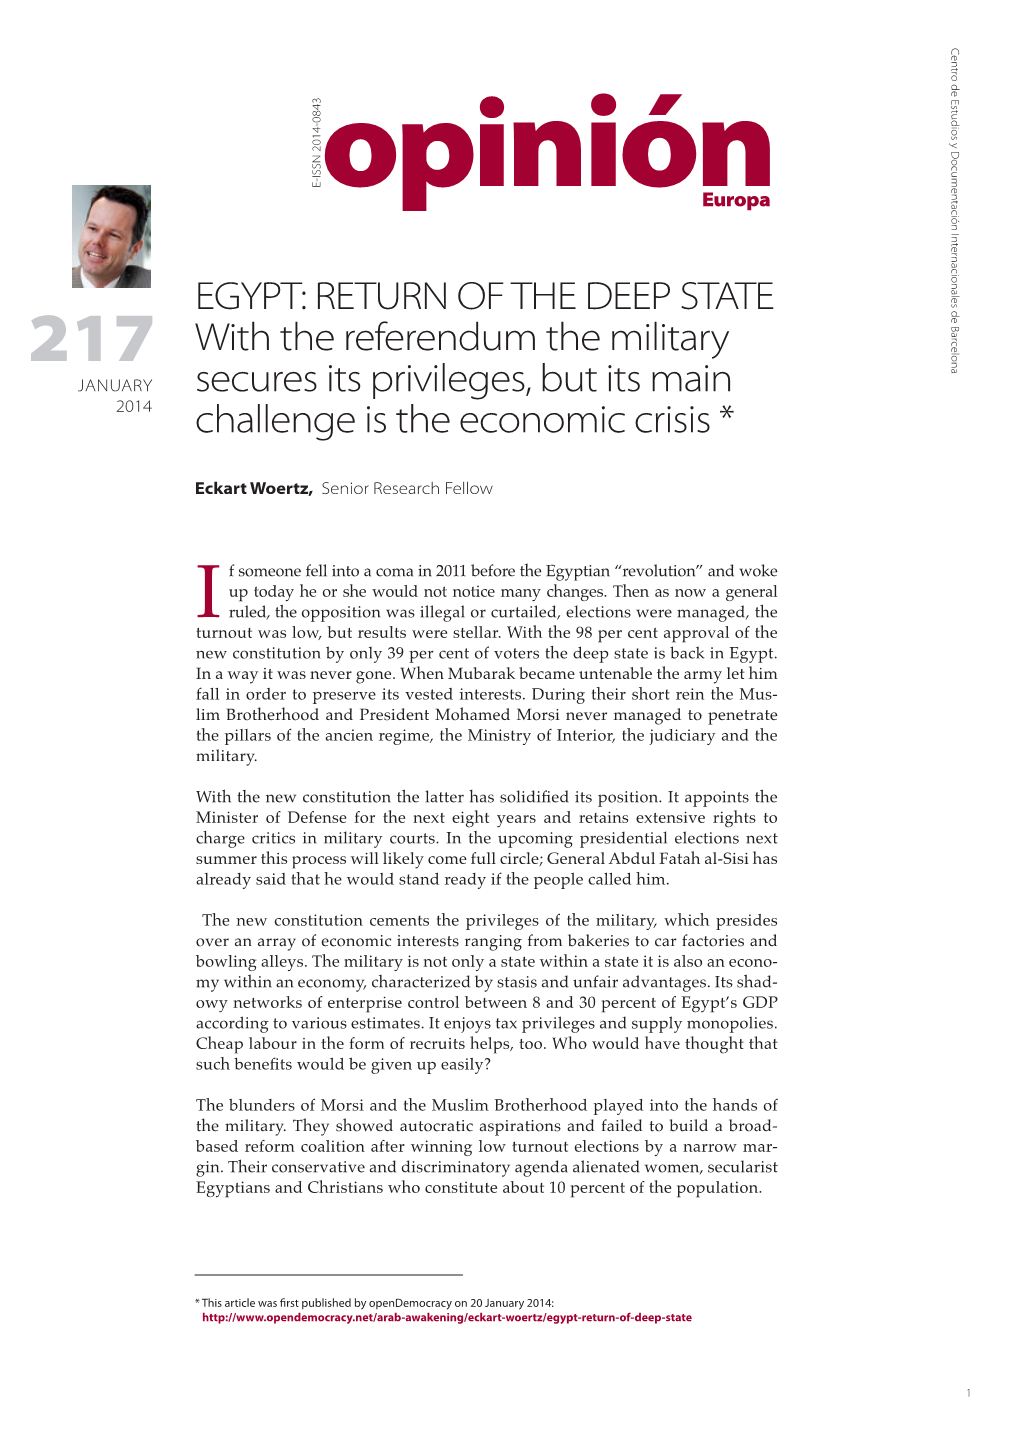 EGYPT: RETURN of the DEEP STATE 217 with the Referendum the Military JANUARY Secures Its Privileges, but Its Main 2014 Challenge Is the Economic Crisis *